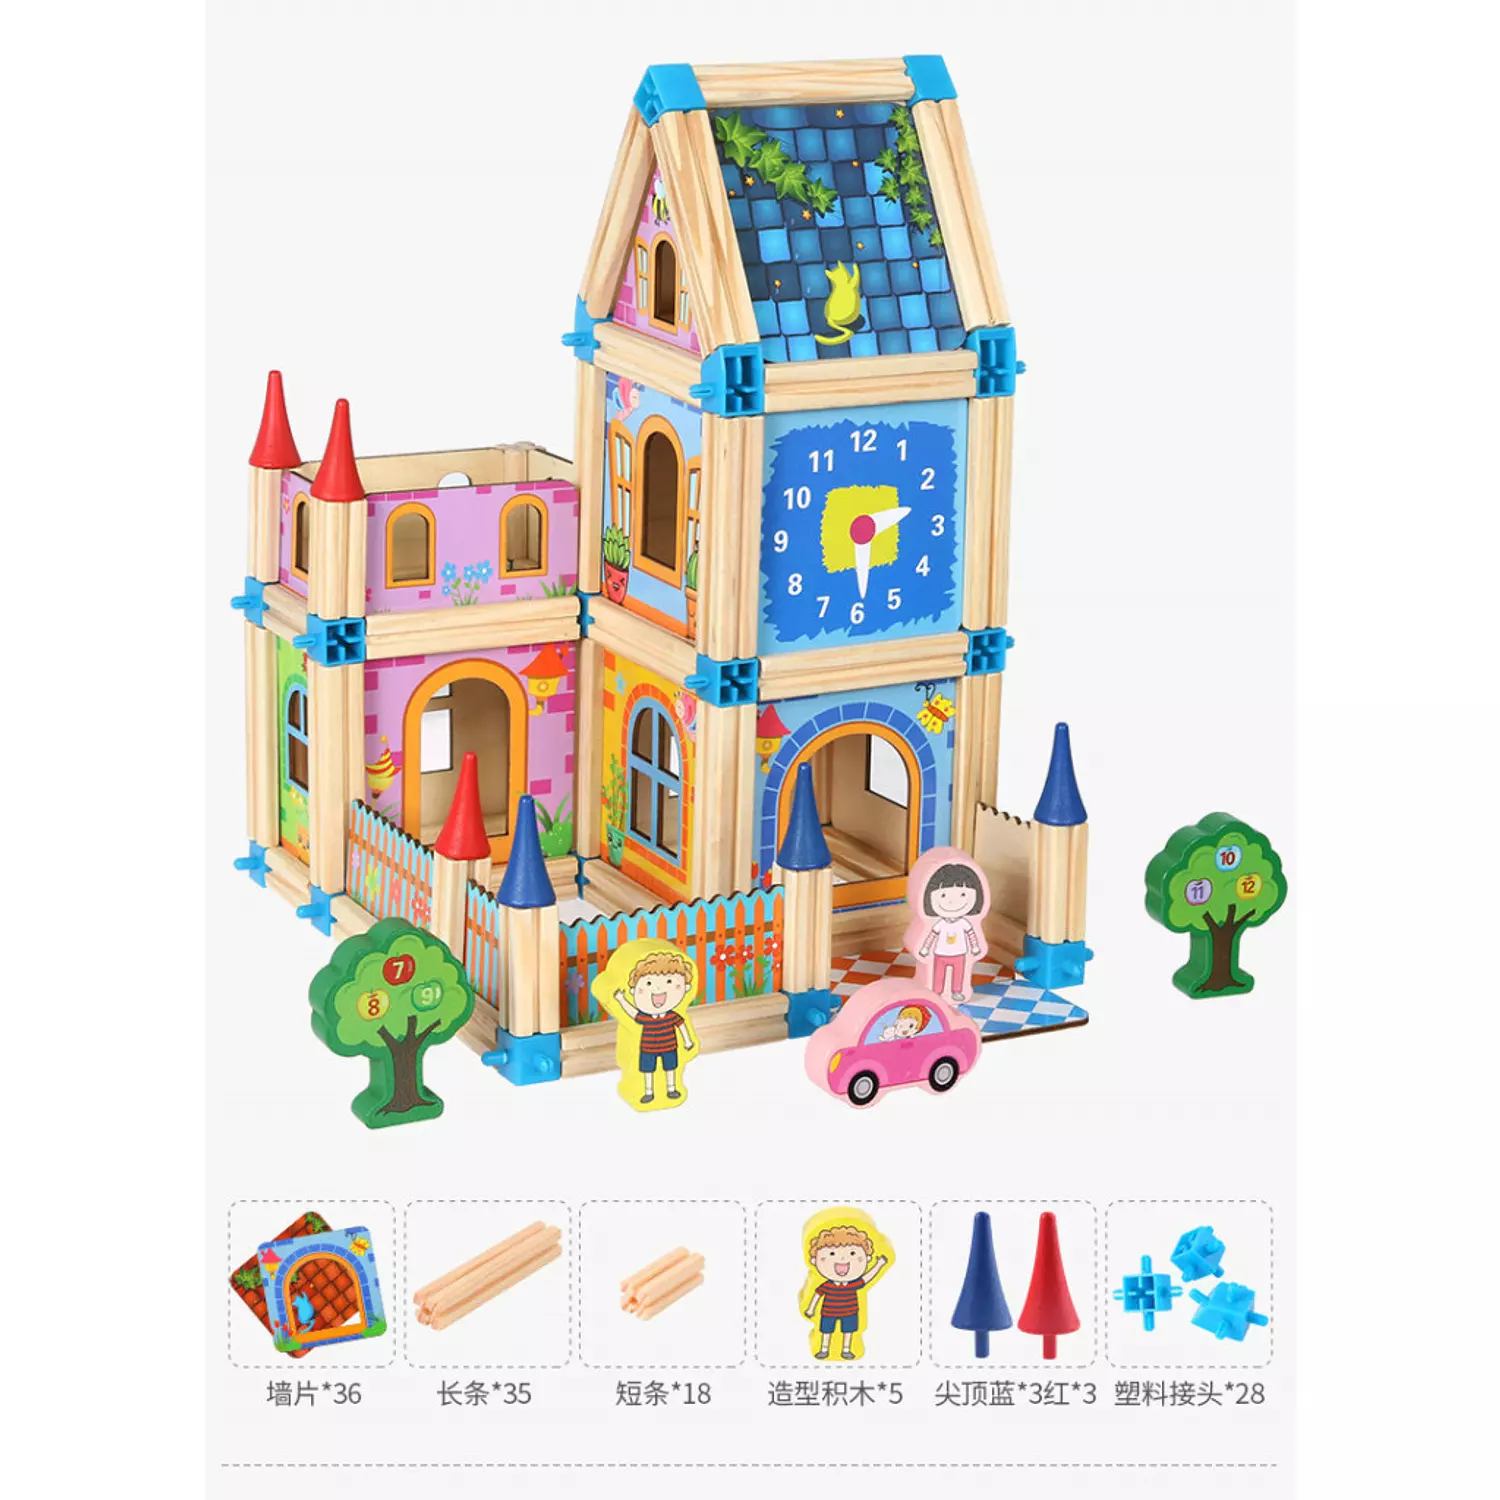 Master of Architecture Building Blocks Toy 1